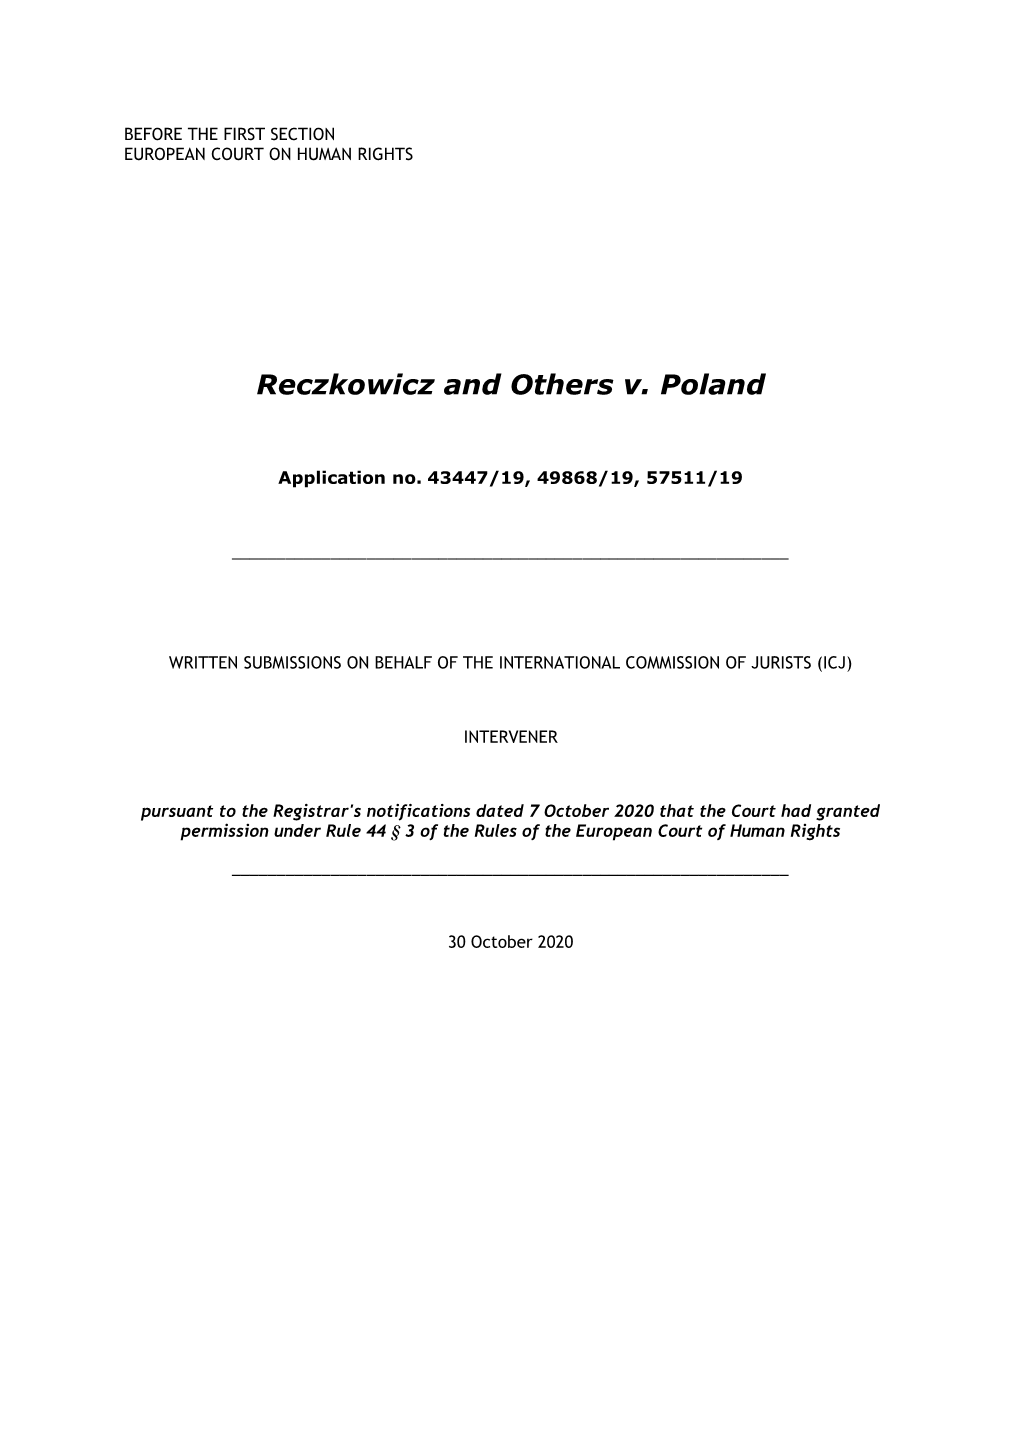 Ecthr-Reczkowicz and Others V Poland